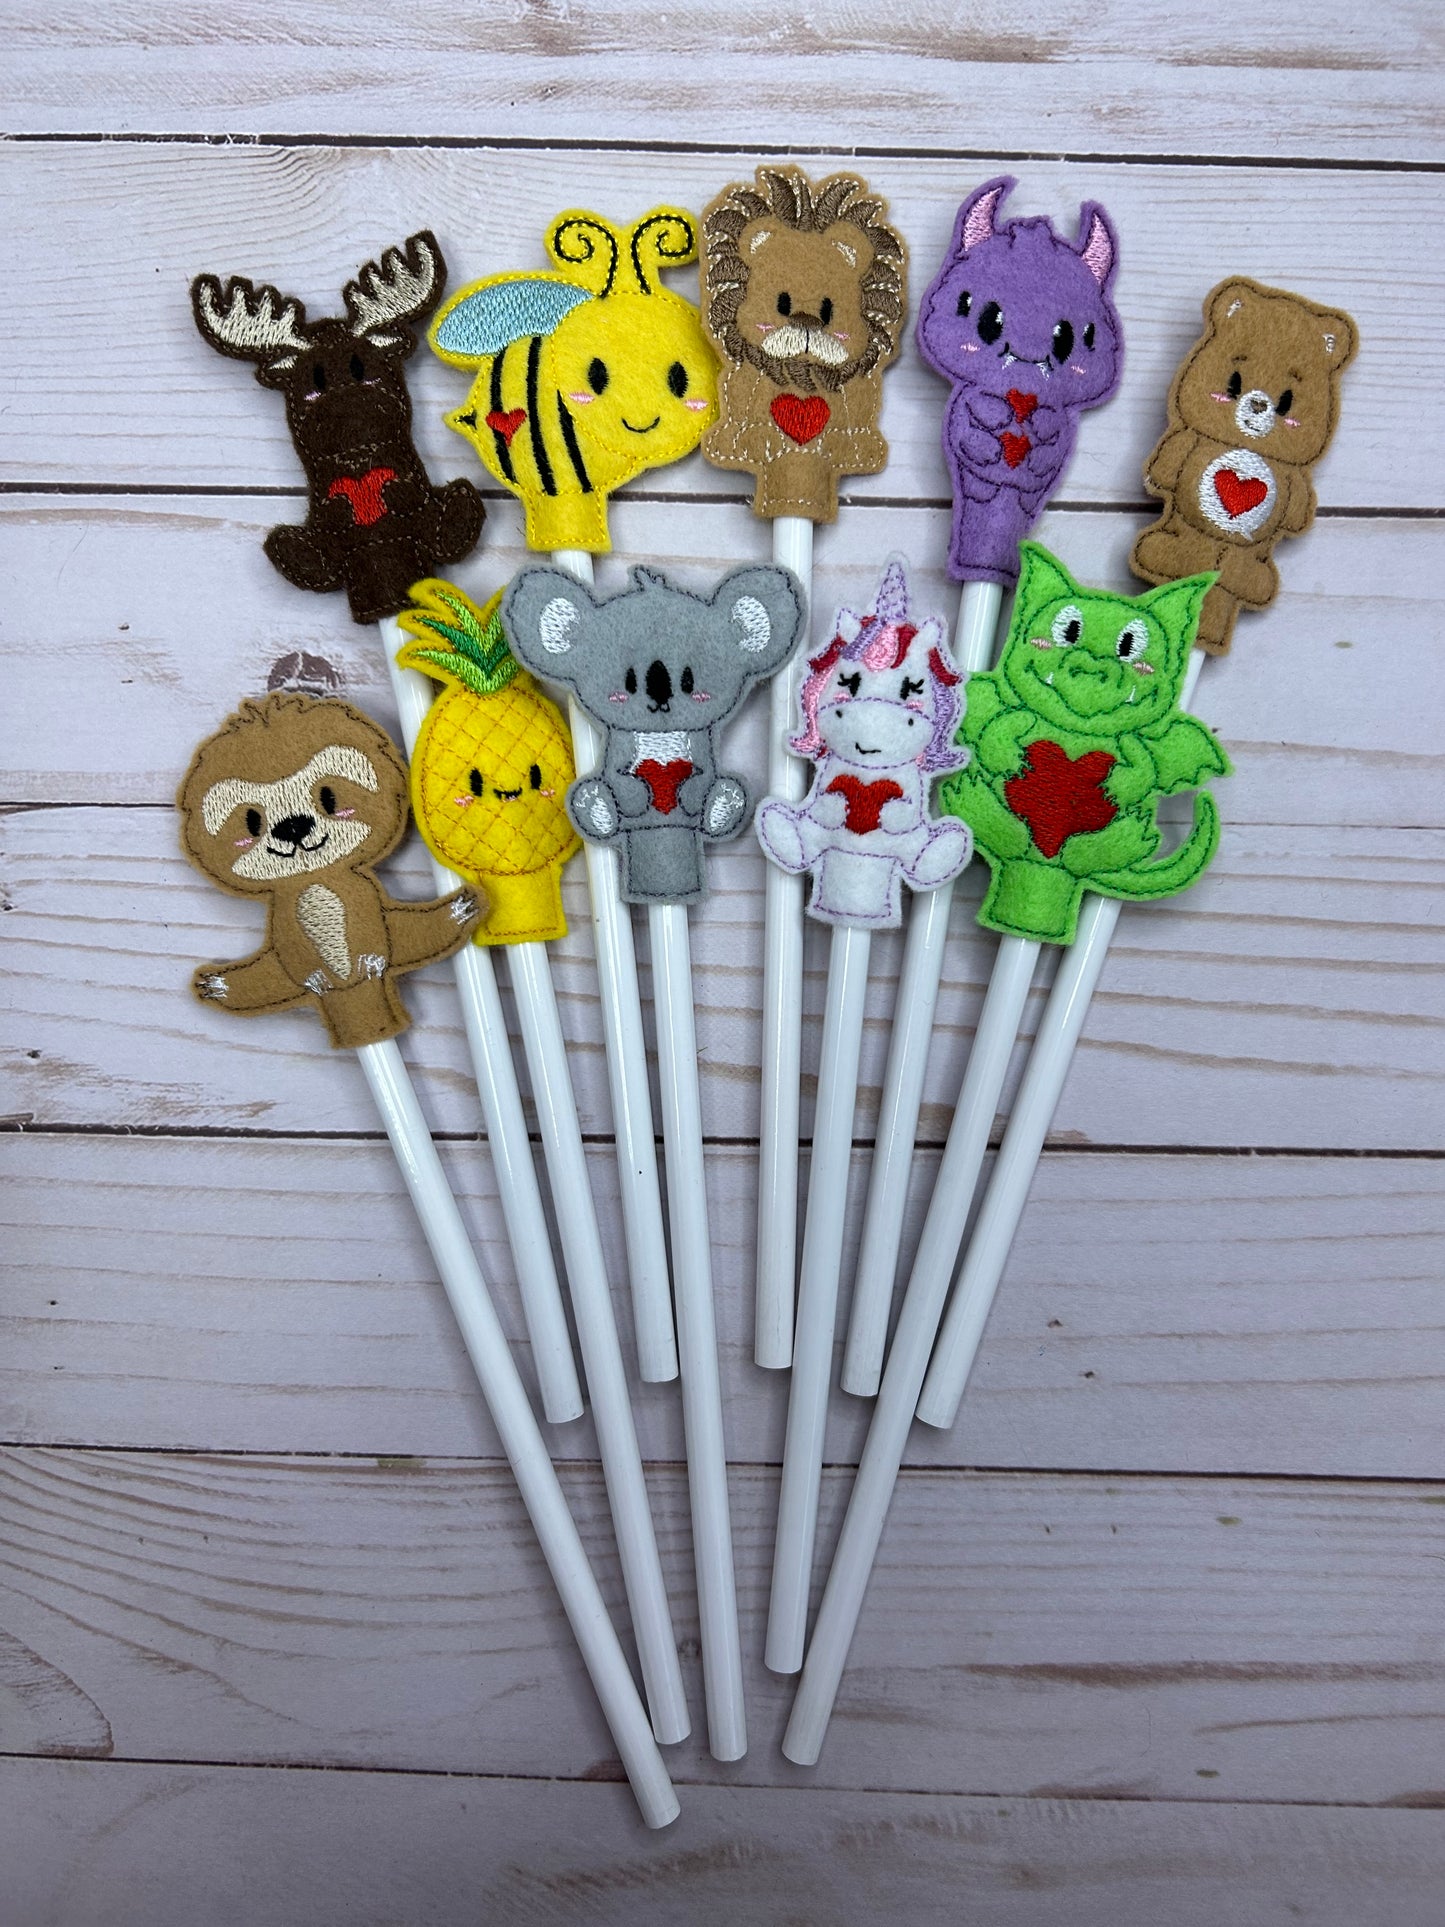 Lion Heart Pencil Topper | Embroidered Toppers, School Accessories, Back To School, Office Supplies, Pen Topper, School Supplies, Party Favor